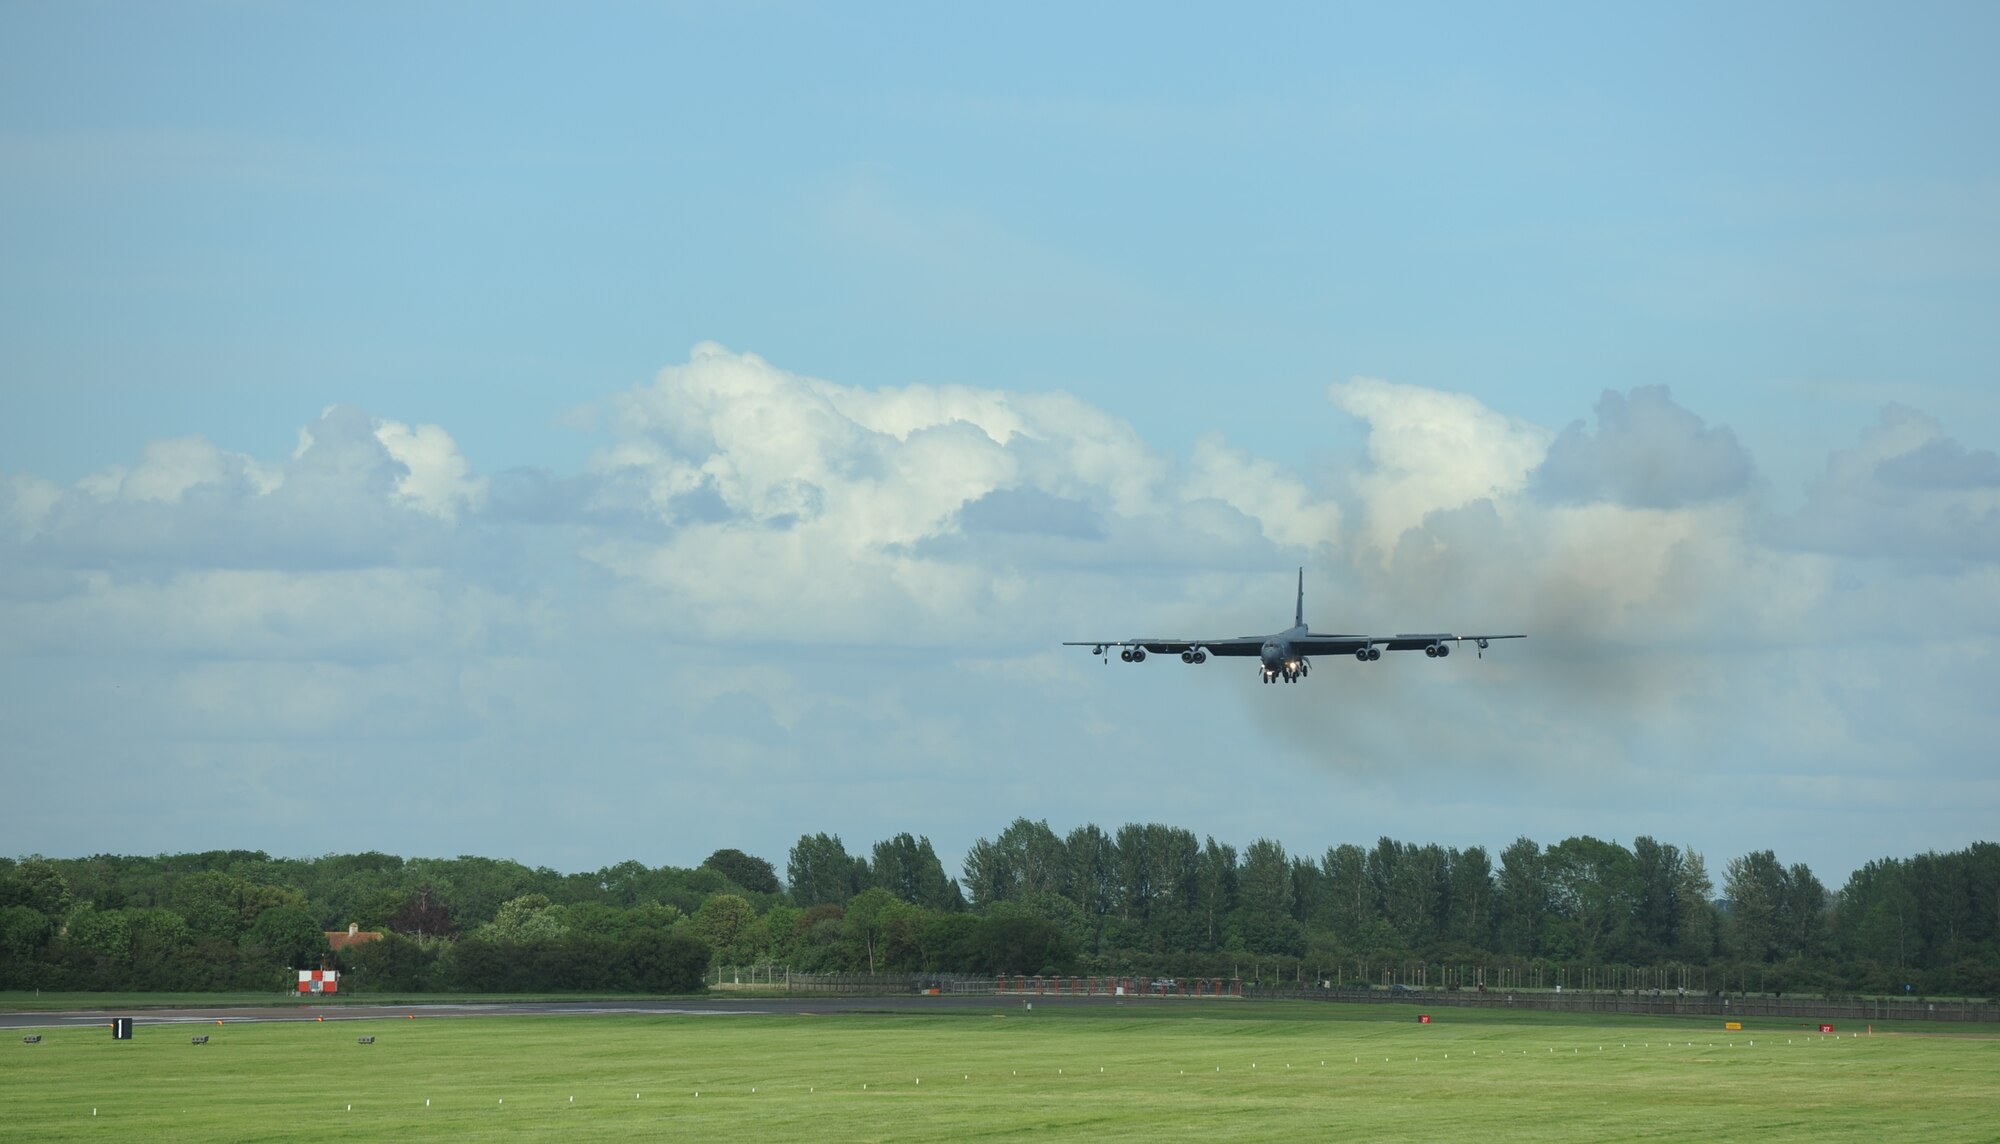 A B-52 Stratofortress from Air Force Global Strike Command lands at Royal Air Force Base Fairford, United Kingdom, June 7, 2014. Seventy years ago, Eighth Air Force supported a planned Allied invasion at Normandy with strategic heavy bombers and fighters during D-Day on June 6, 1944. The B-52 flew over Normandy to honor those Service members who fought and gave the ultimate sacrifice that day. (U.S. Air Force photo by Staff Sgt. Nick Wilson/Released)